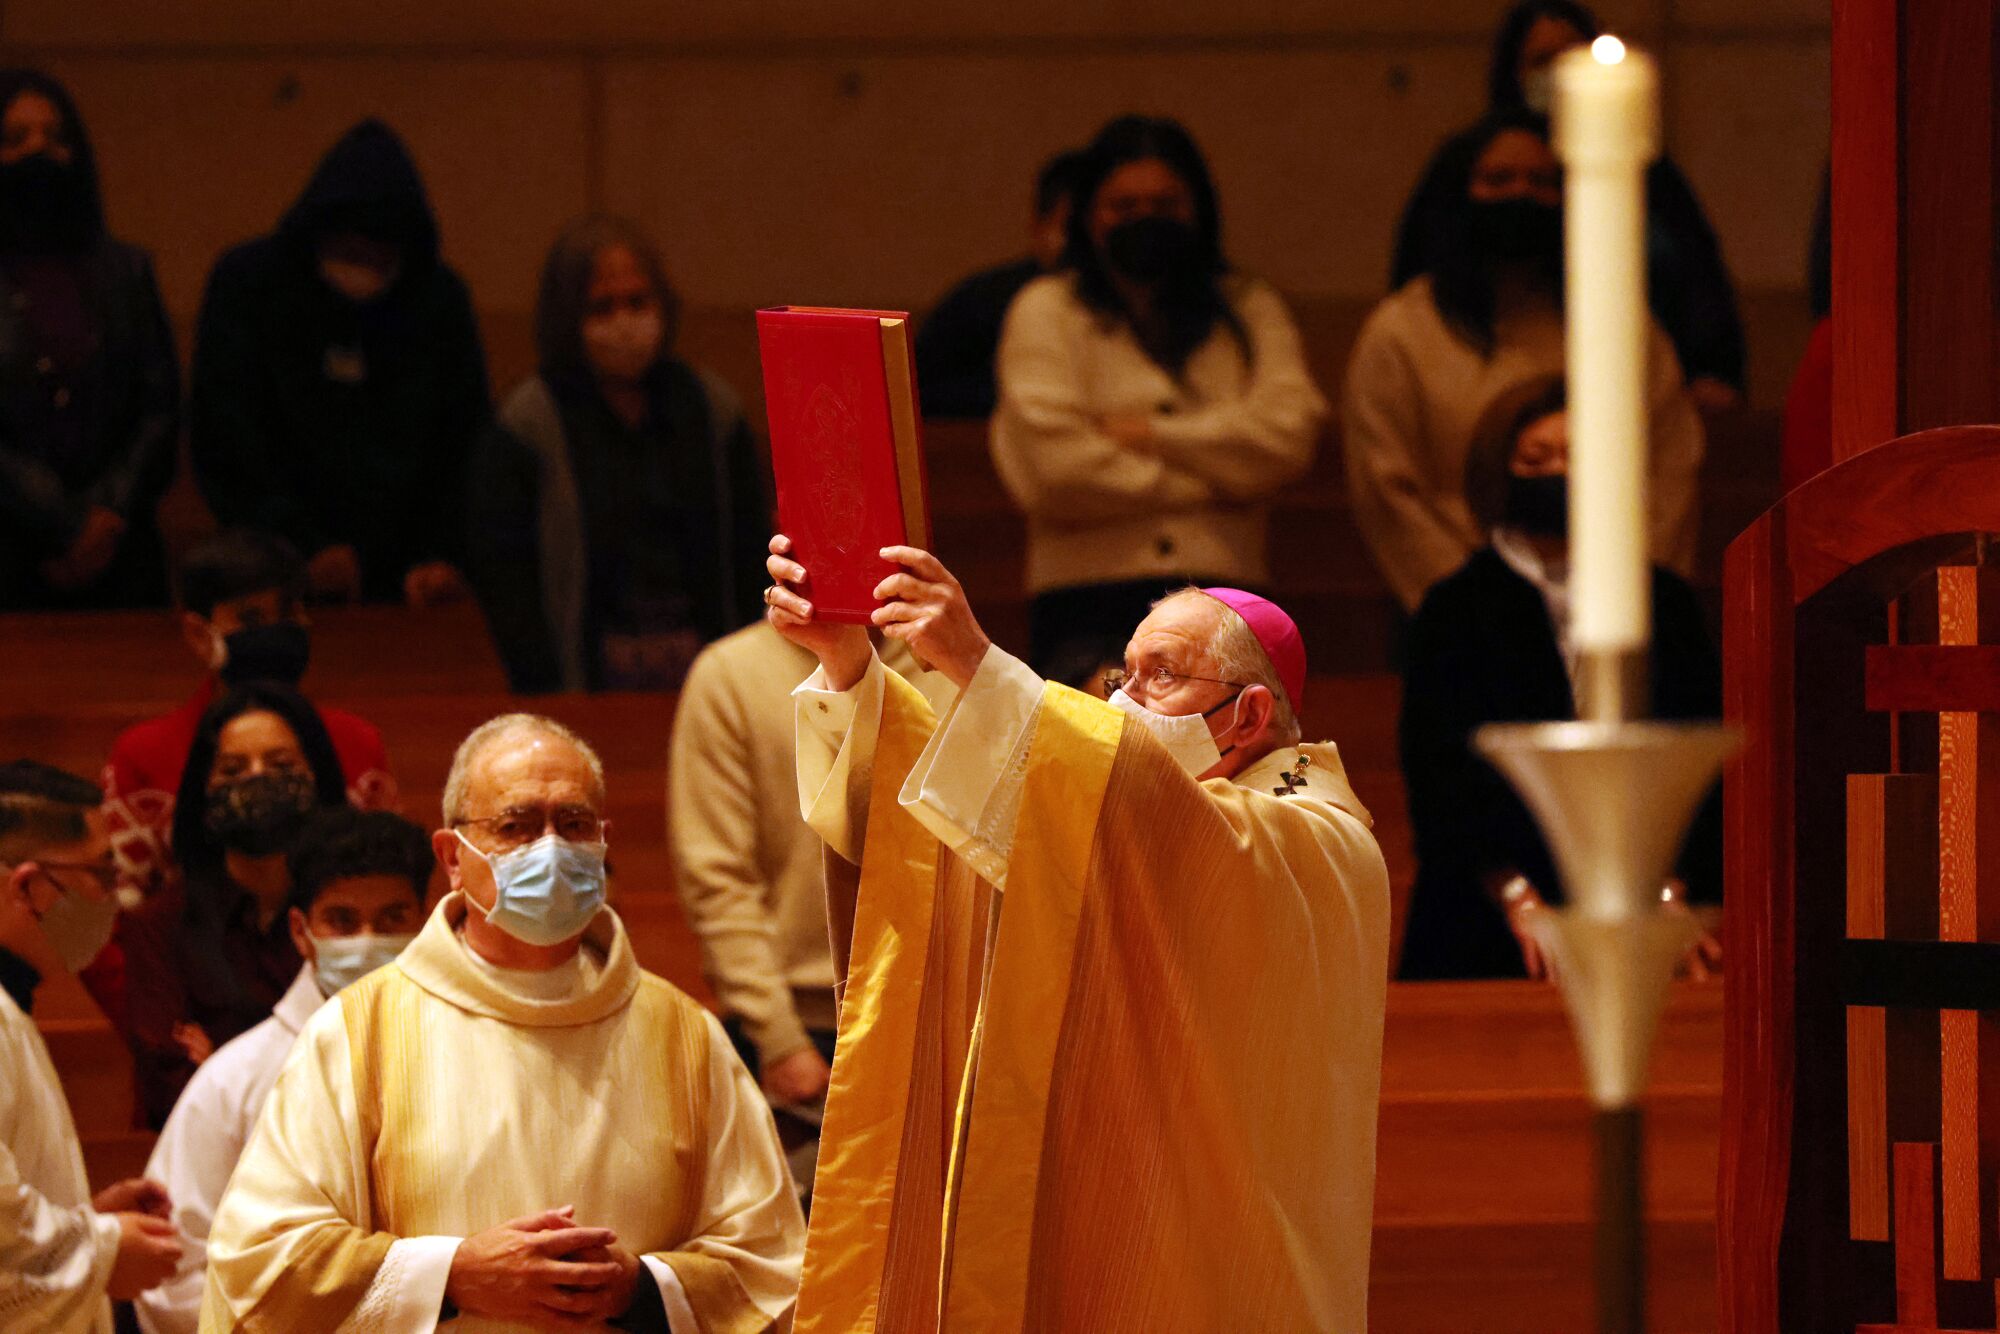 Archbishop Jose H. Gomez presides over Christmas Eve Family Mass at Cathedral of Our Lady of the Angels in Los Angeles